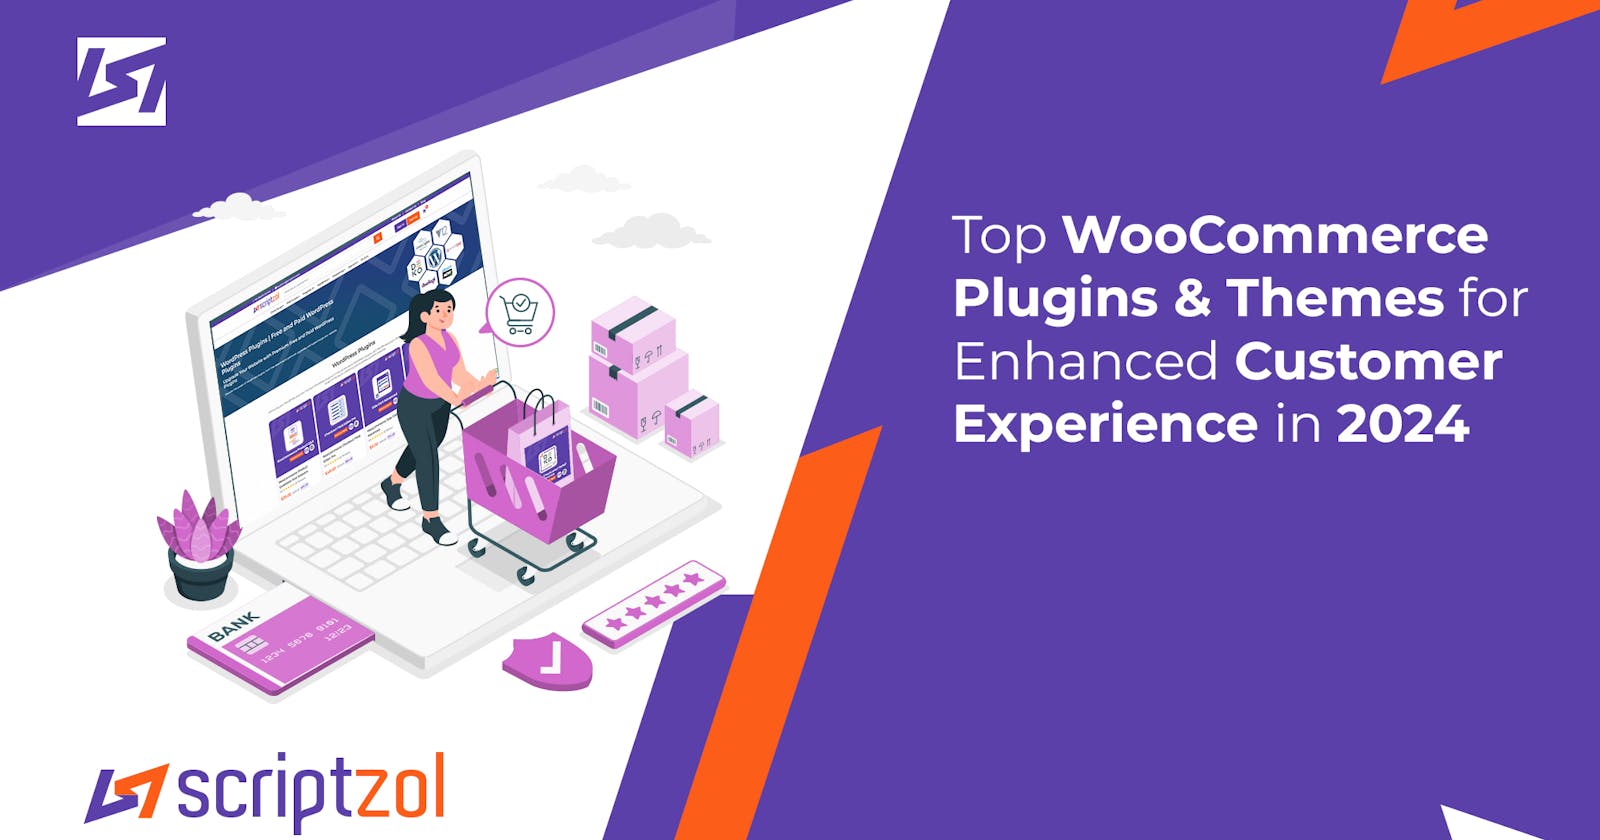 Top WooCommerce Plugins & Themes for Enhanced Customer Experience in 2024 - Scriptzol